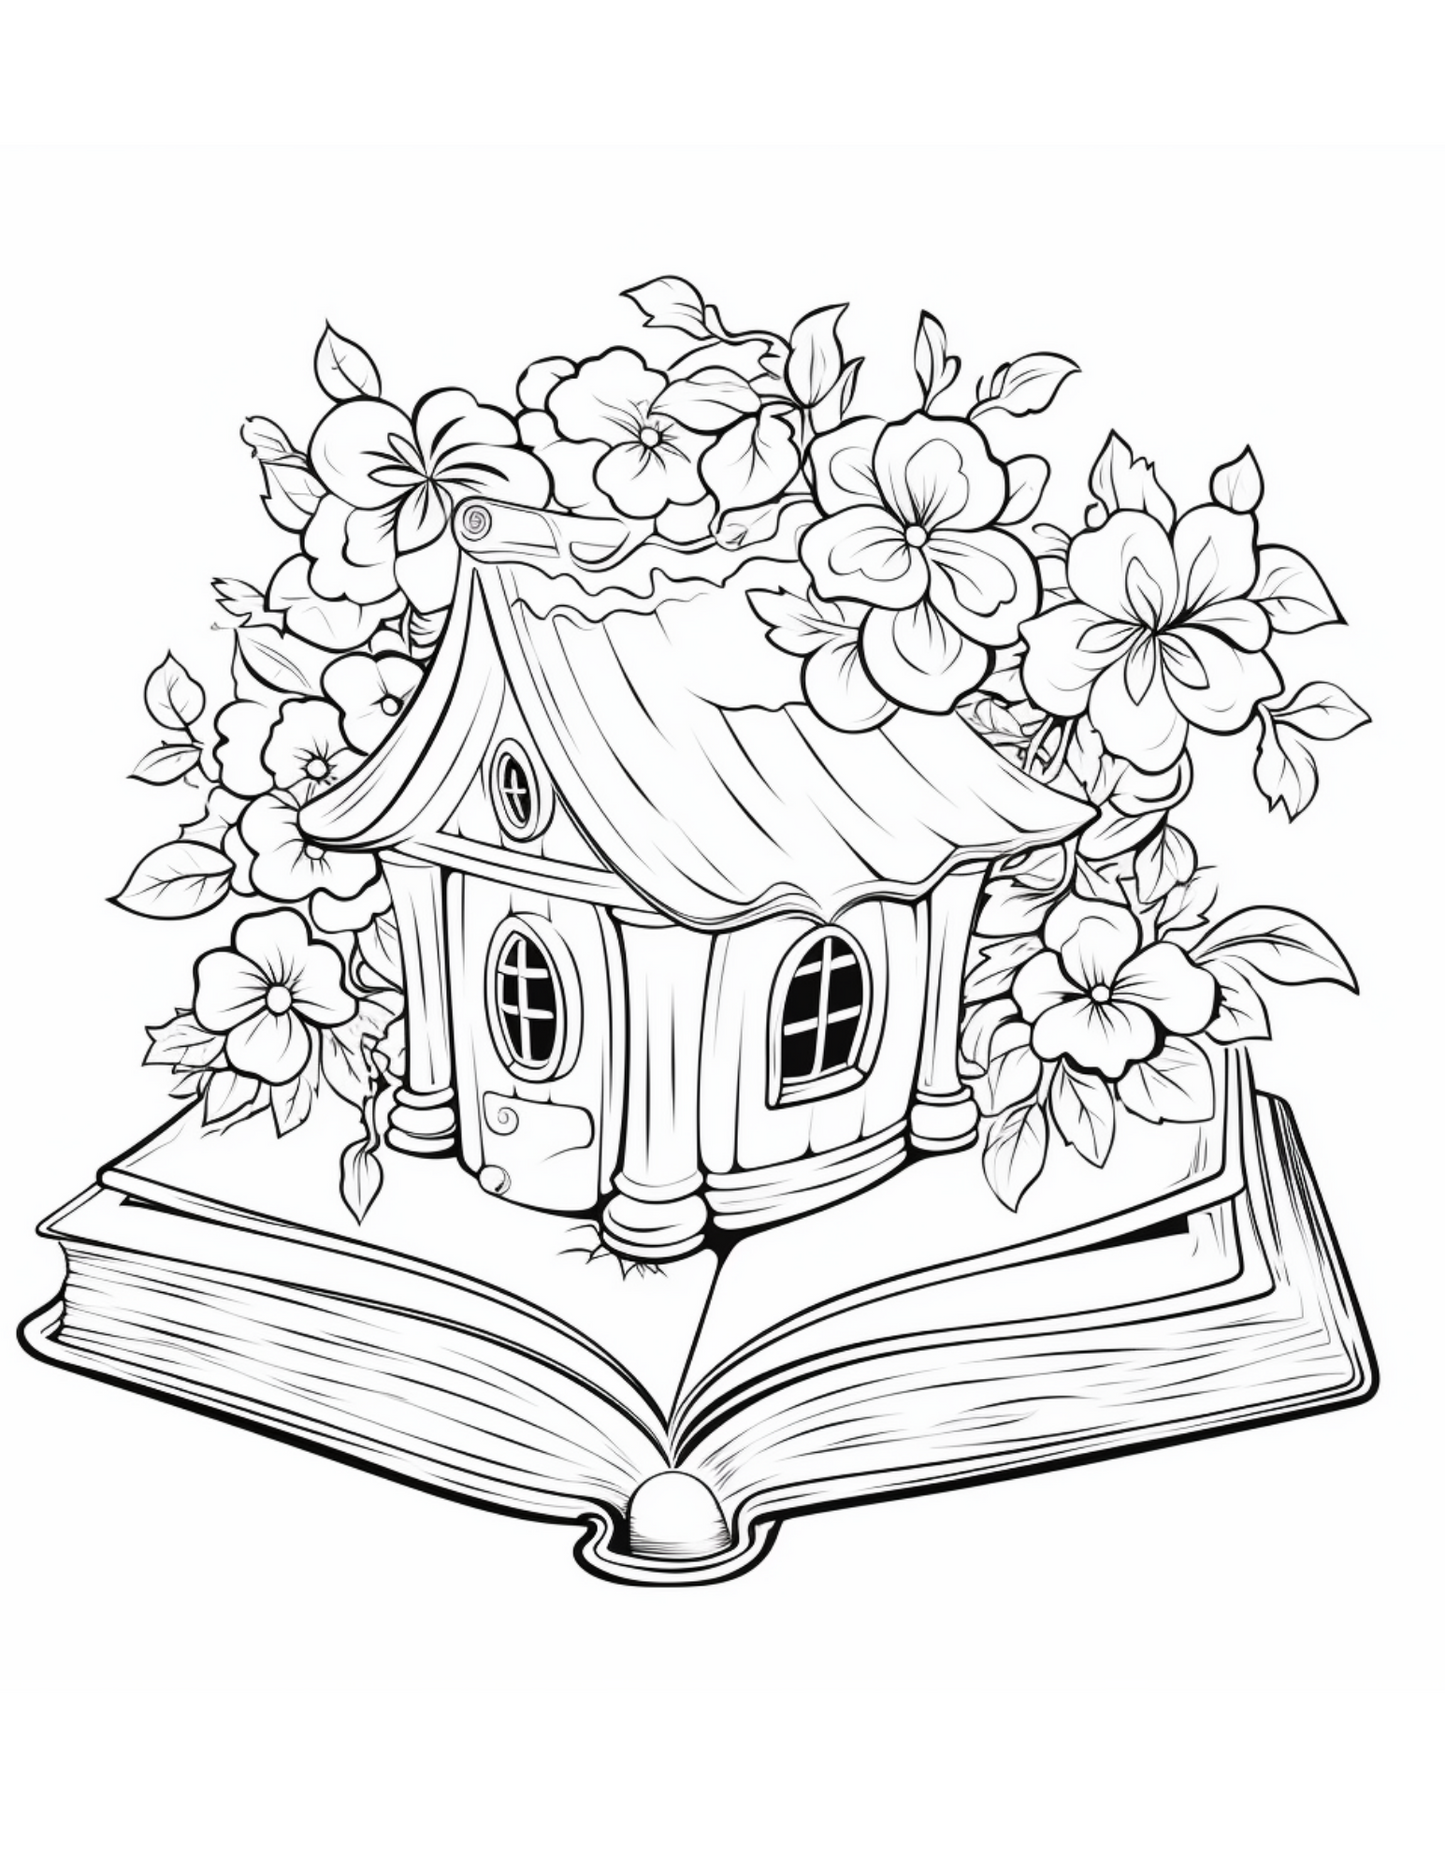 garden coloring pages, book coloring pages